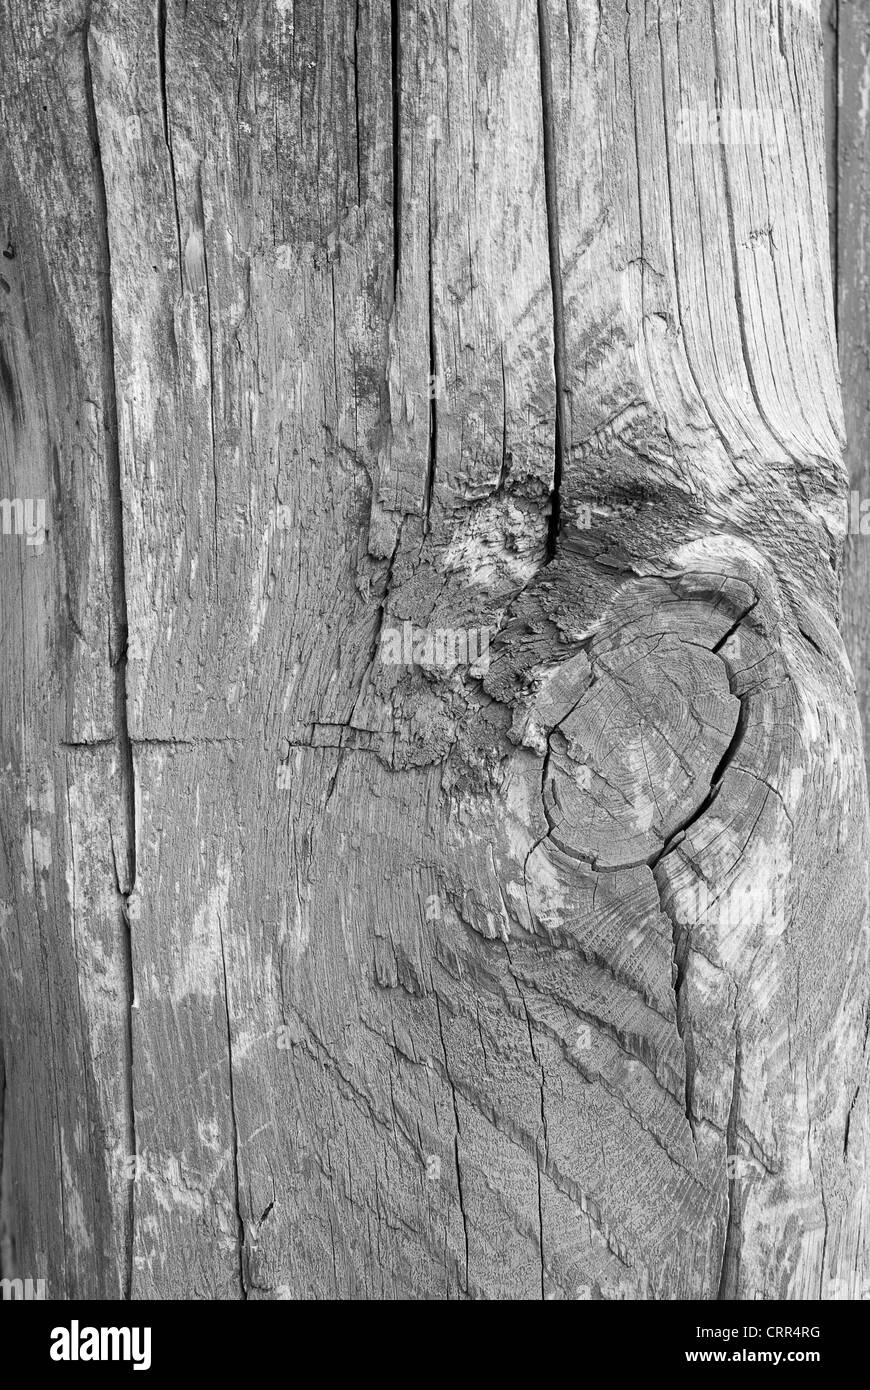 close up view of wooden texture Stock Photo